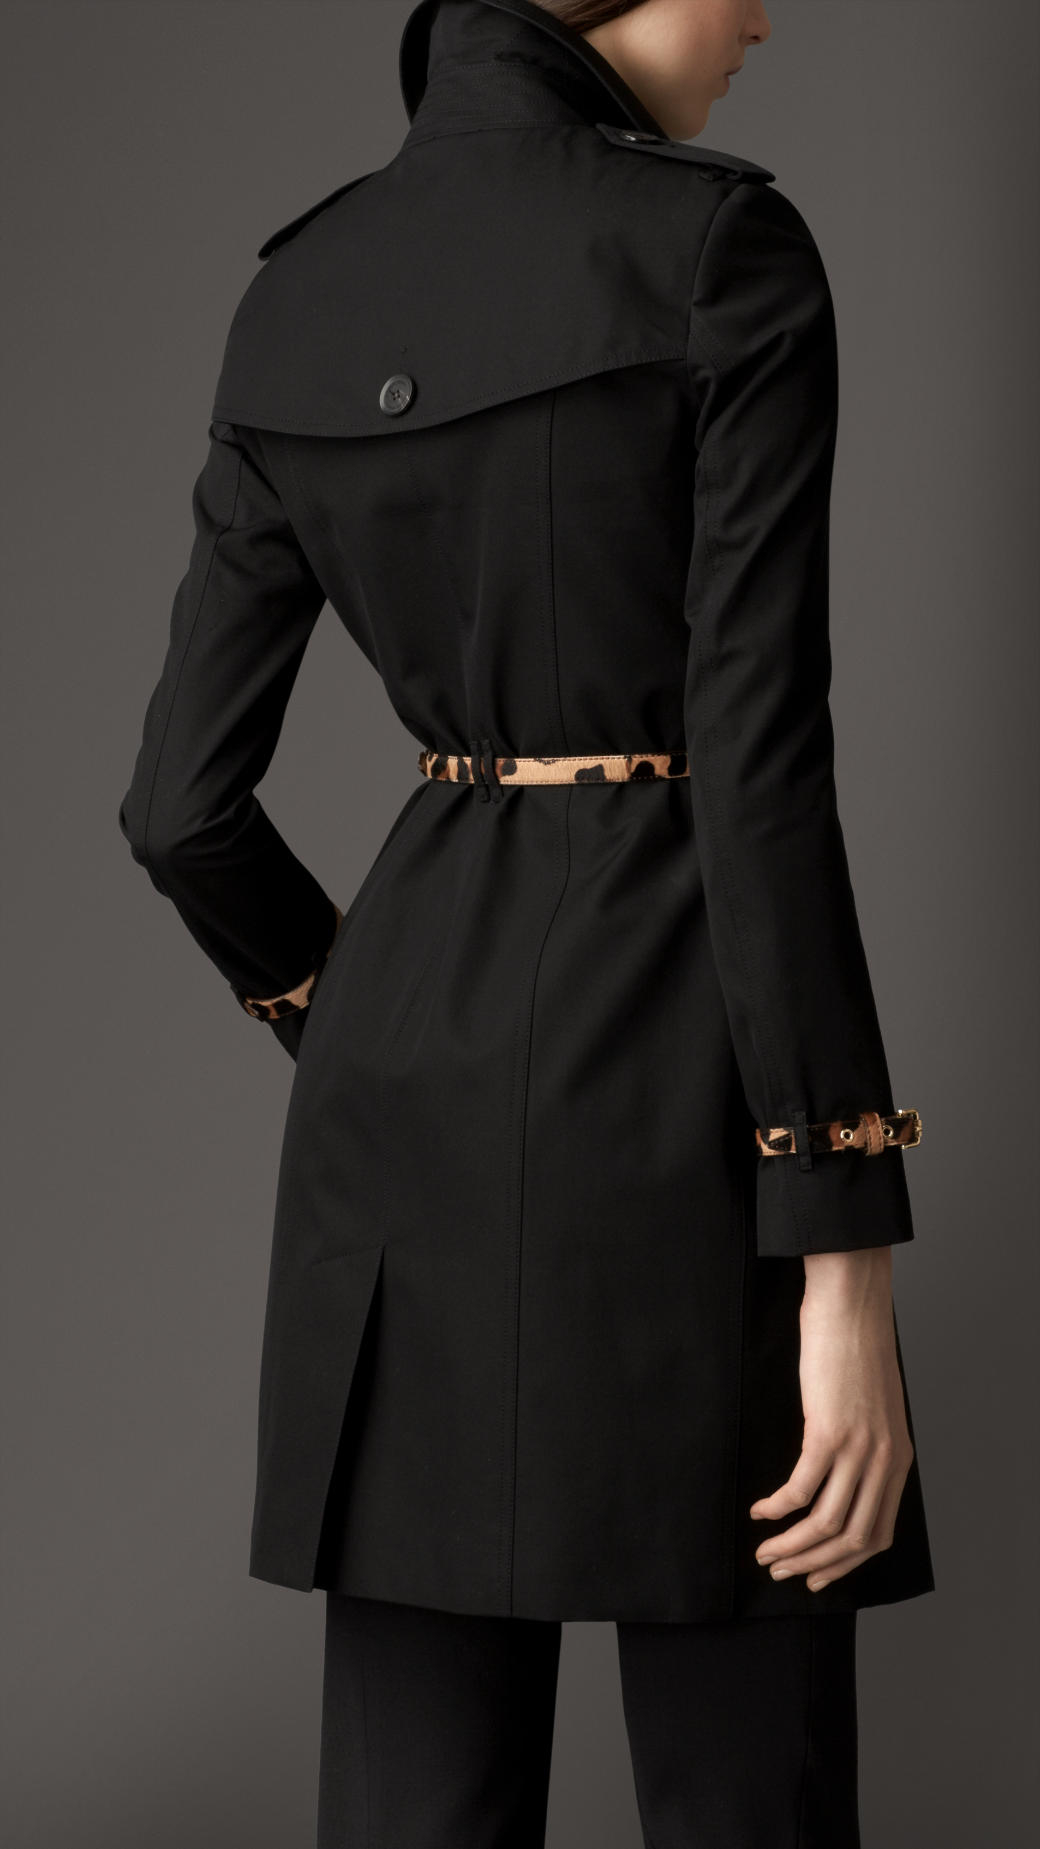 Lyst - Burberry Mid-Length Trench Coat With Animal Print Trim in Black